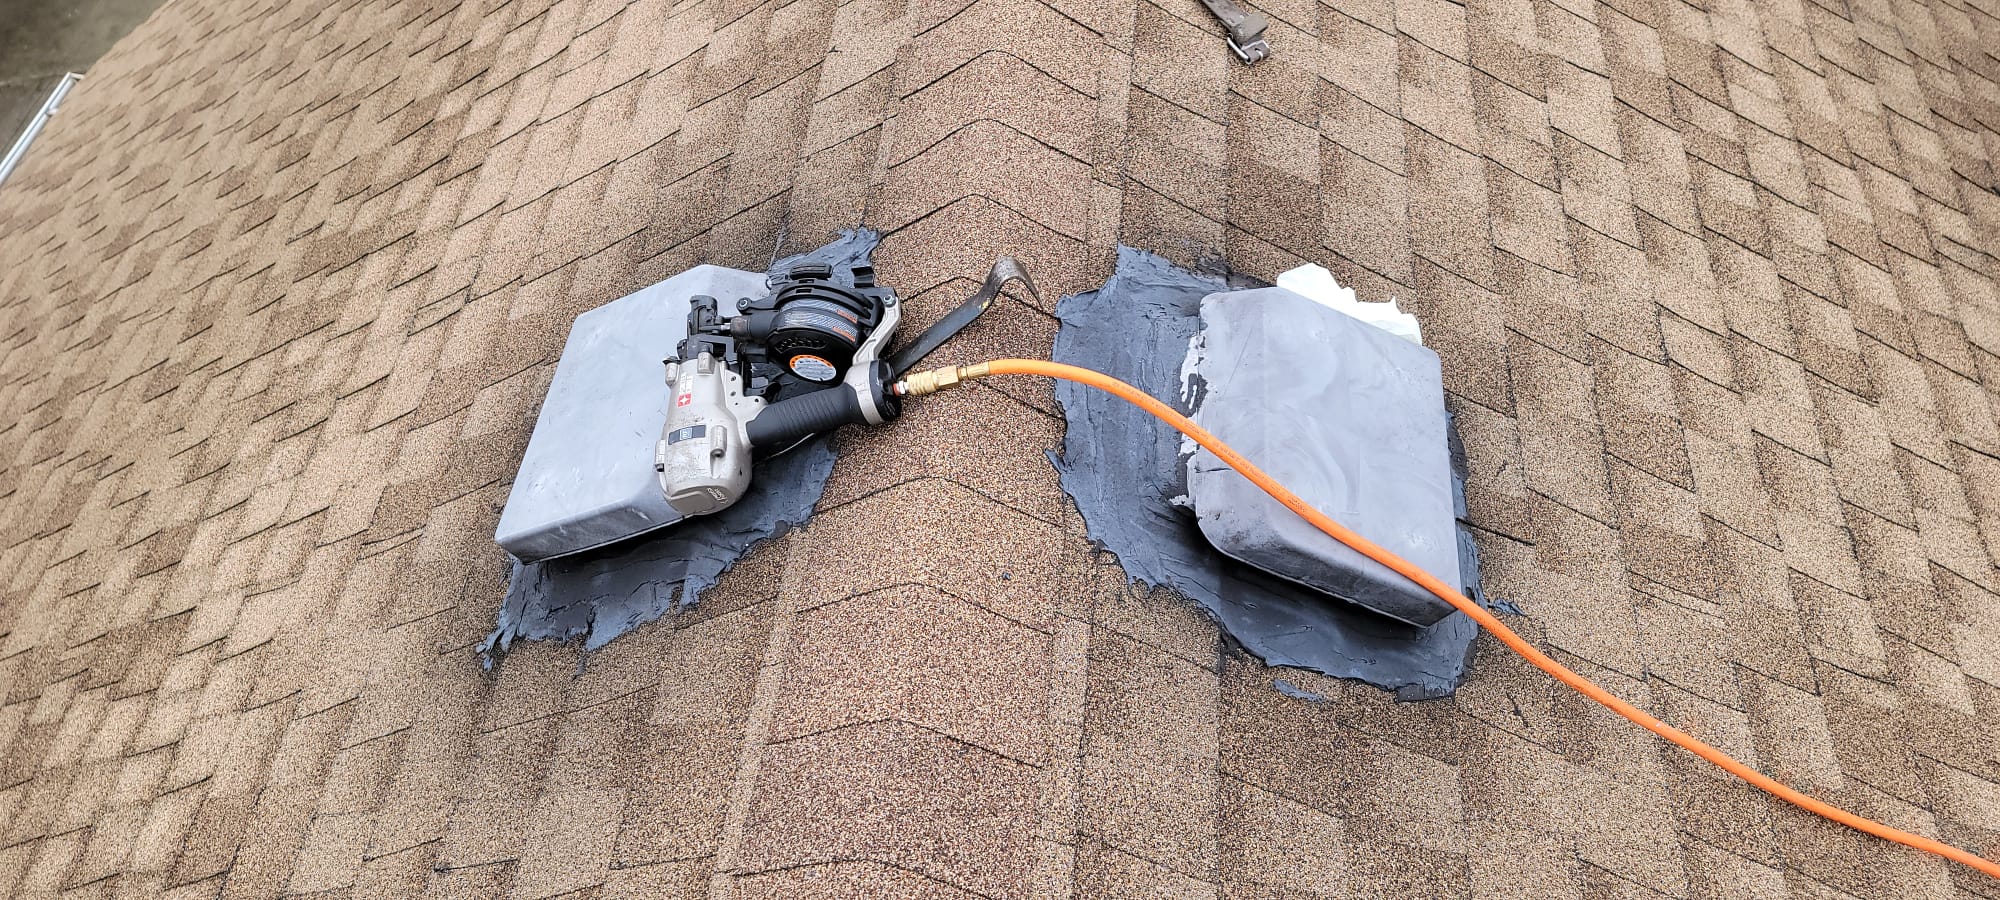 3 Types of Roof Safety Systems to Protect Your Toughest Roofers